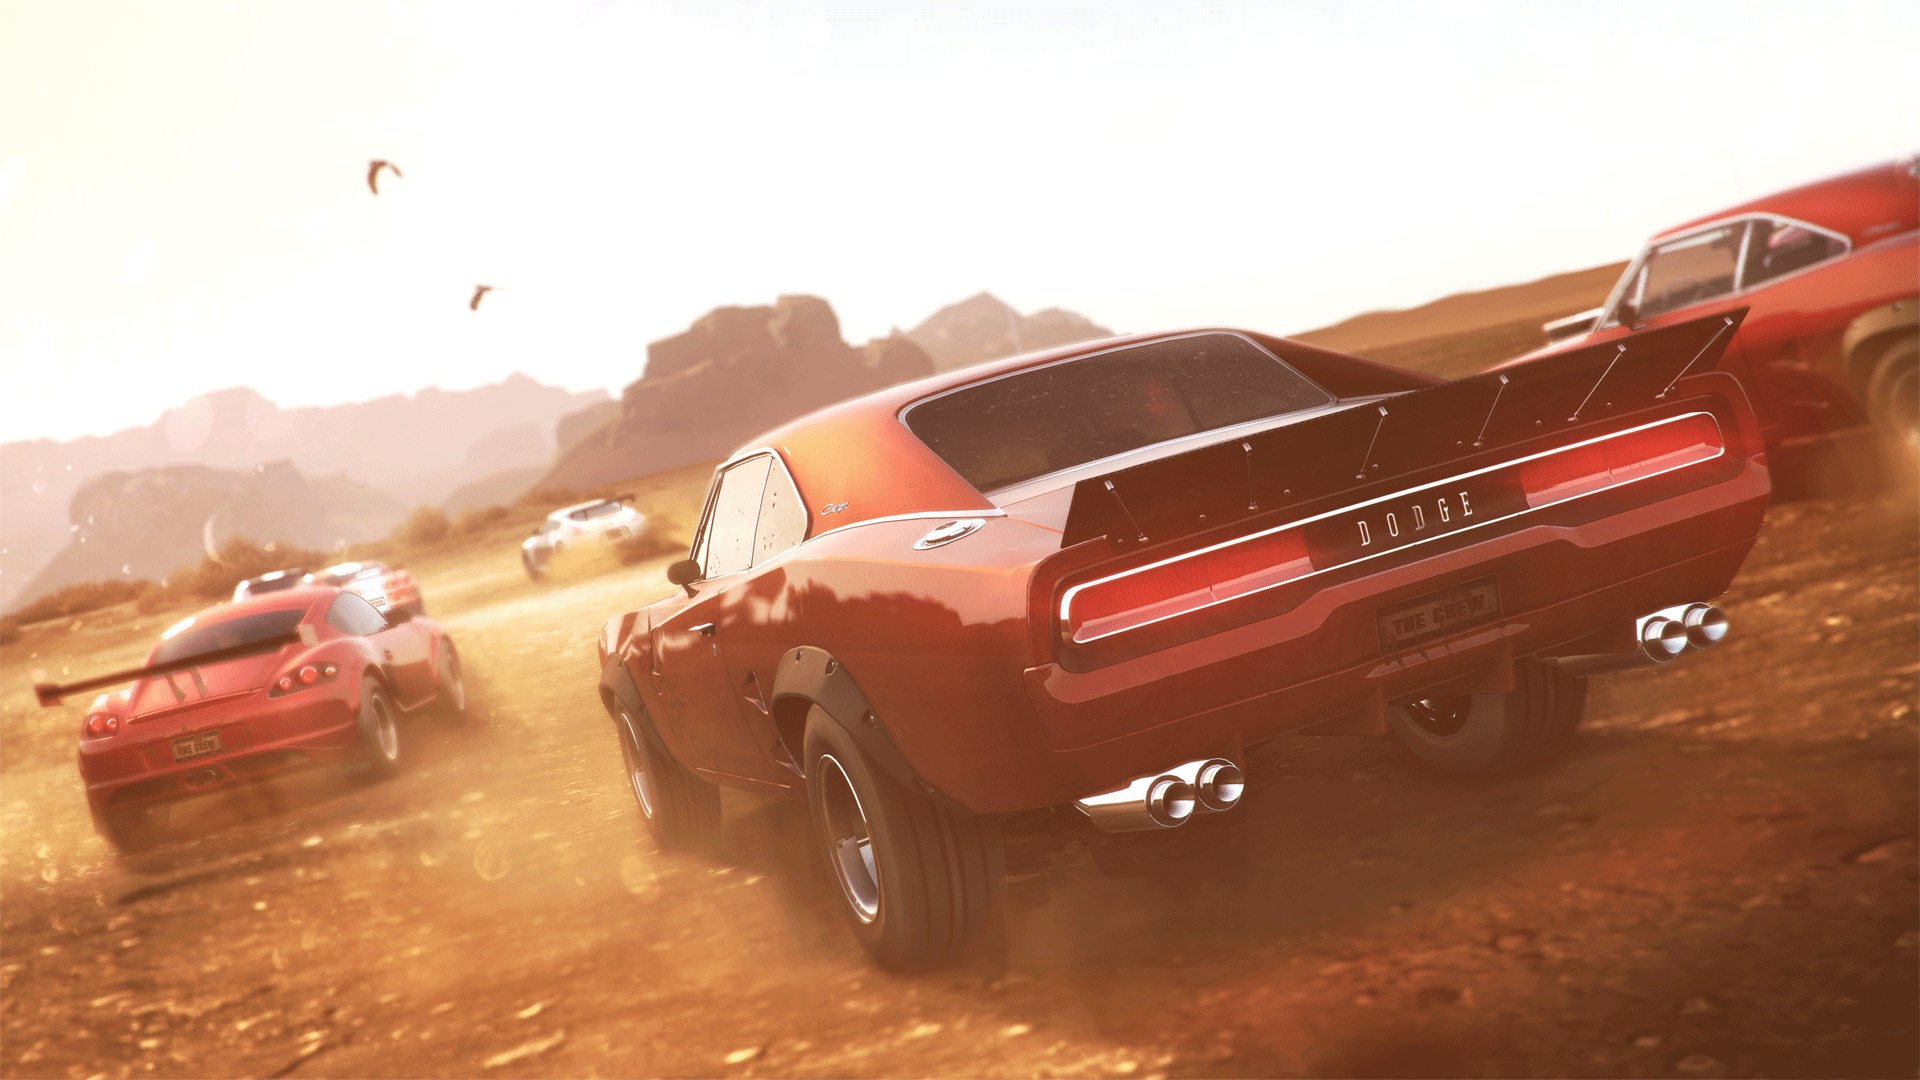 The Crew - Muscle Car